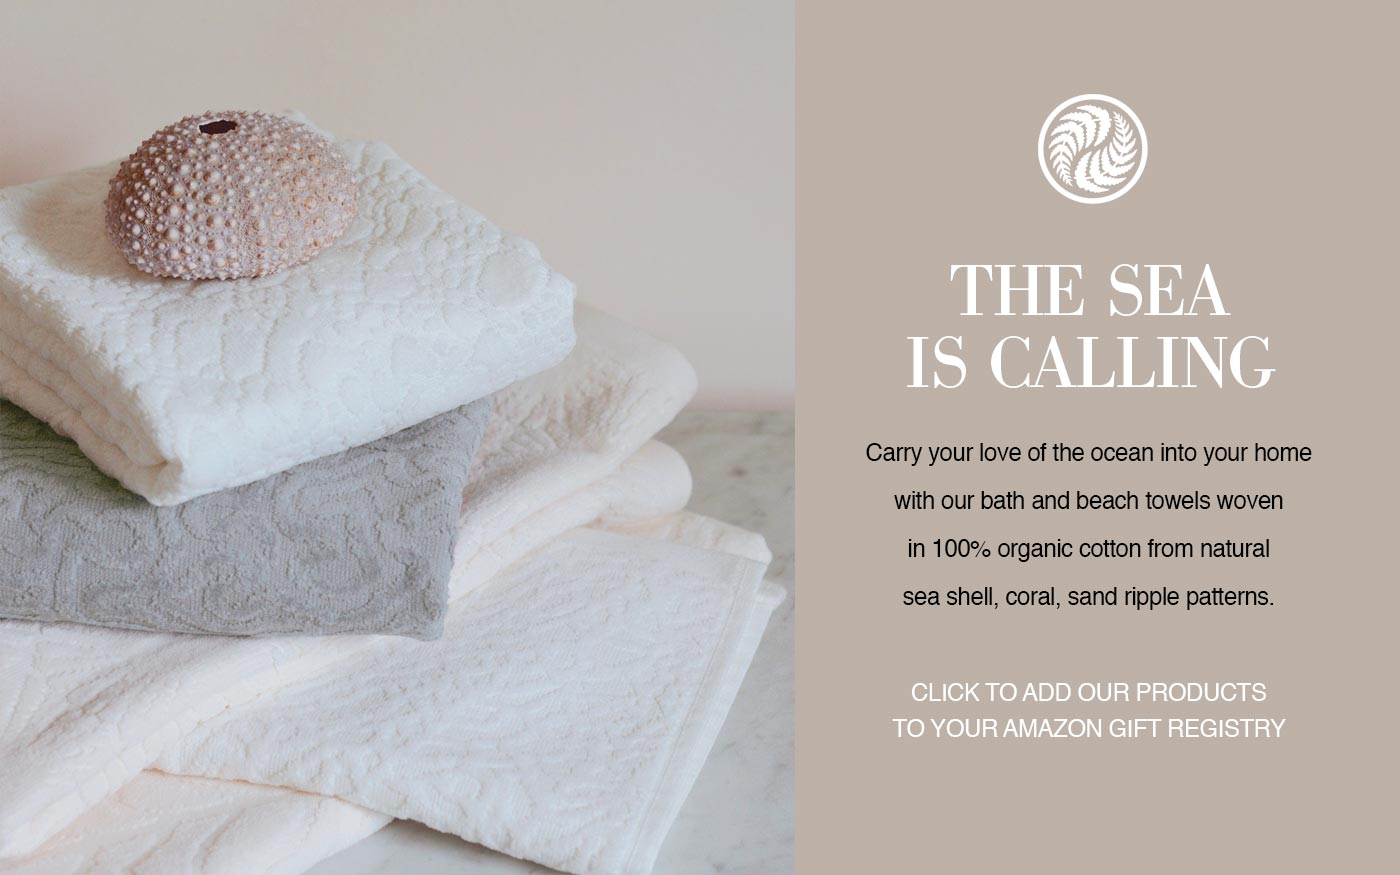 affina organic towels woven in natural patterns from the sea